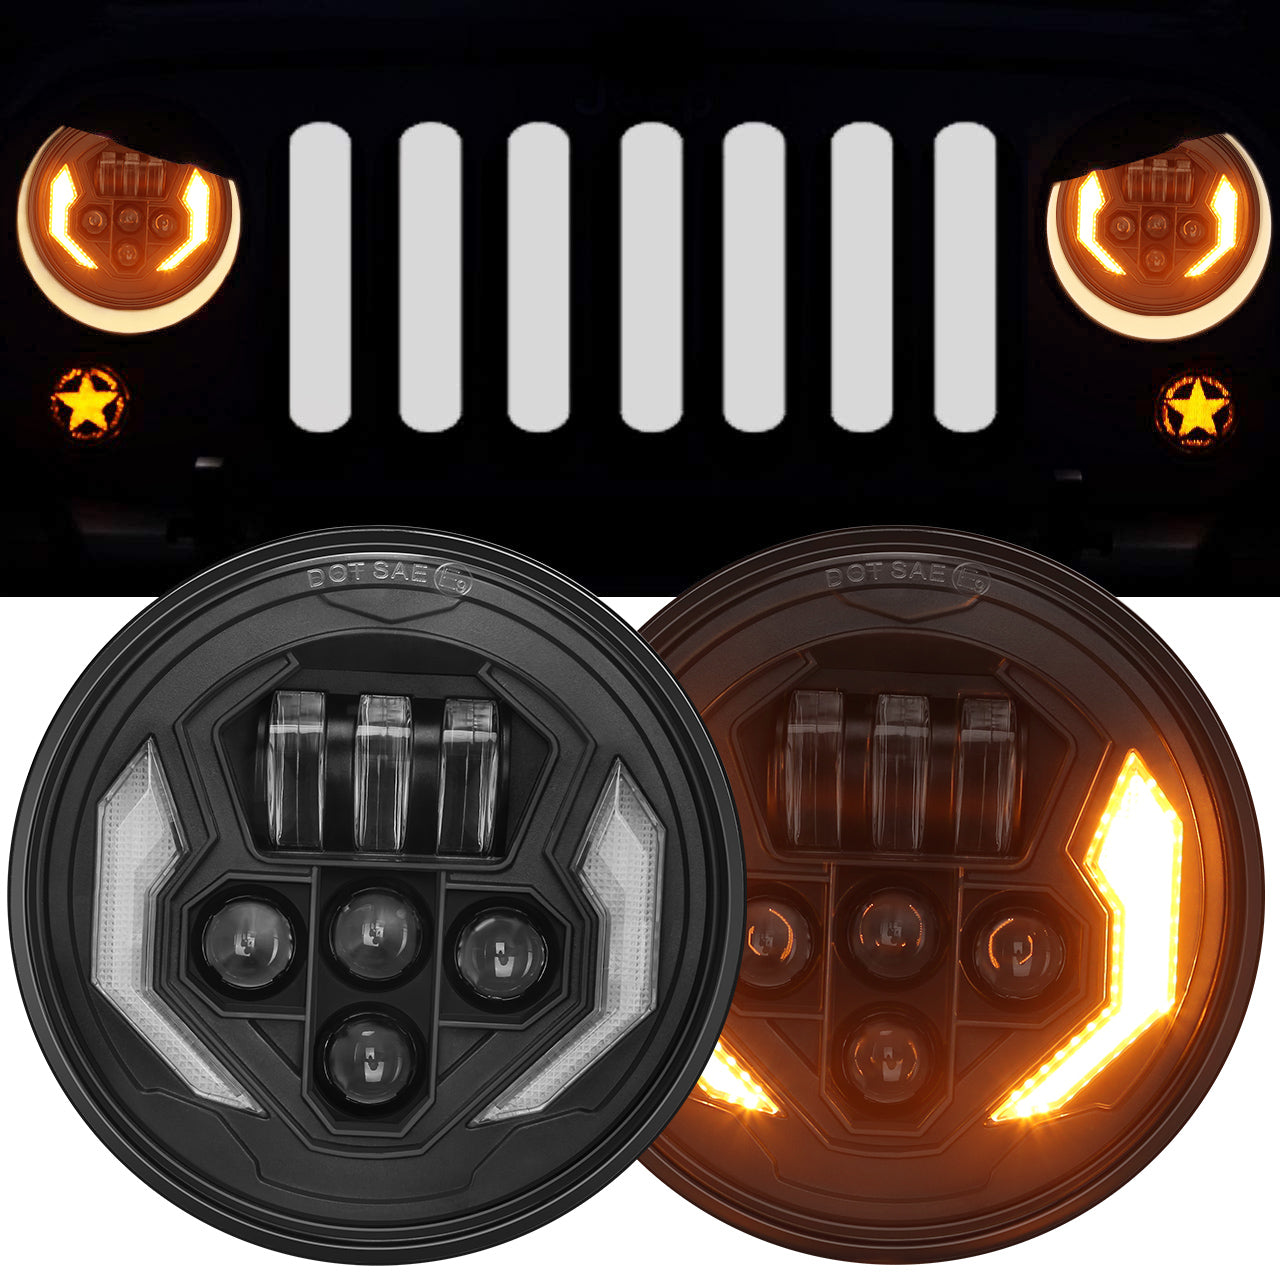 Lightning Style 7'' LED Headlights with White DRL & Amber Turn Signals for 1997-Later Jeep Wrangler